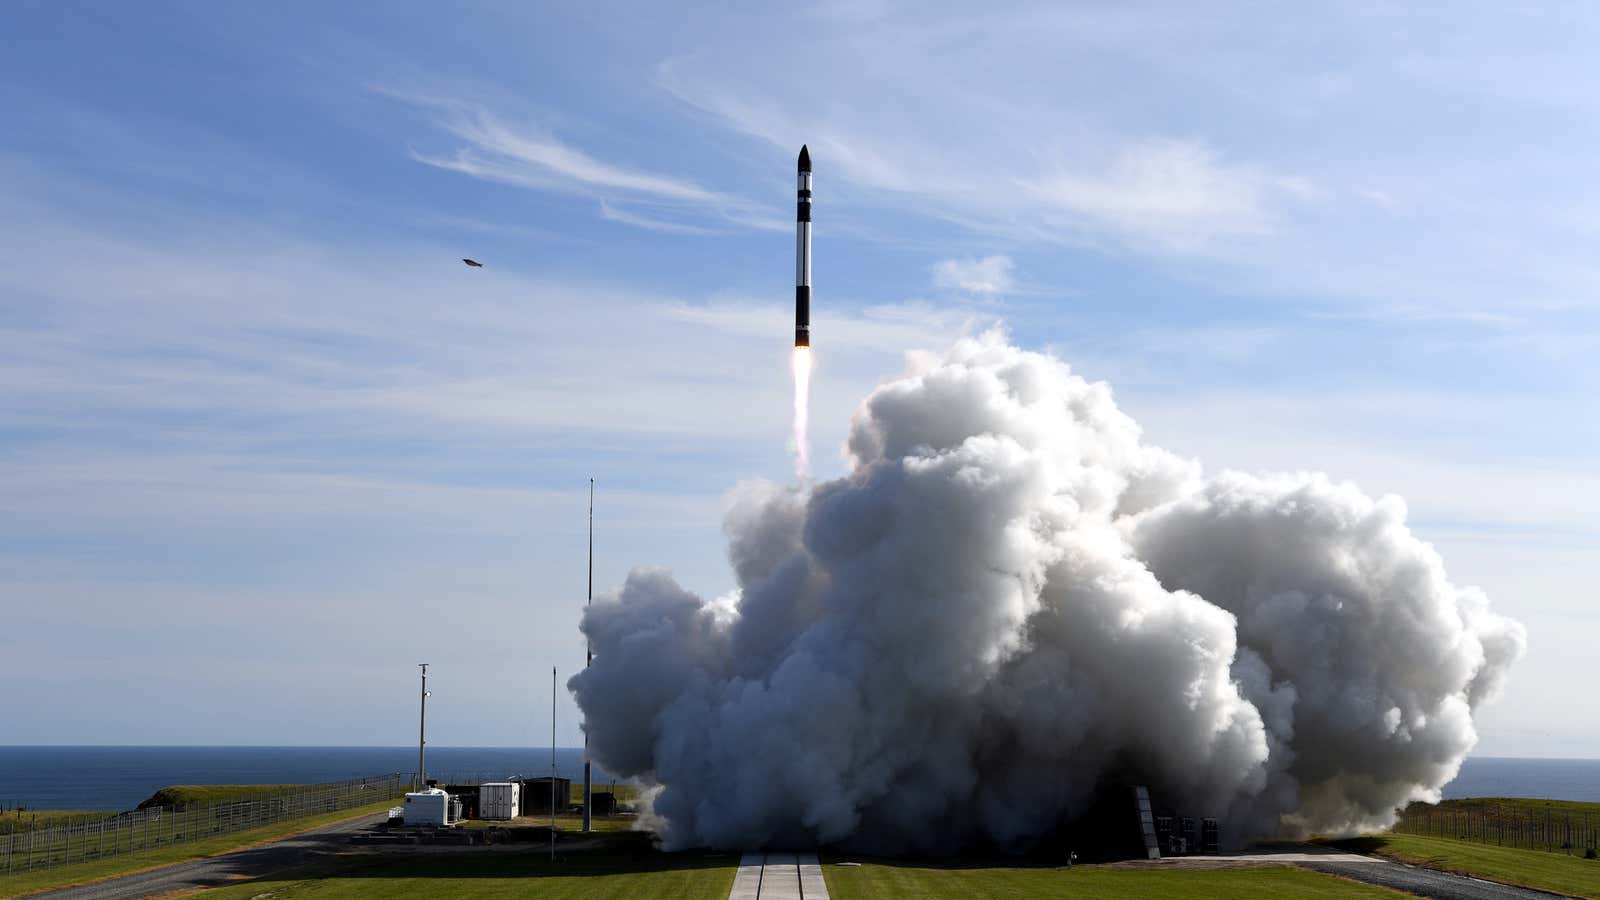 Rocket Lab’s Electron rocket “It’s Business Time” lifts off in New Zealand on Nov. 11 2018.